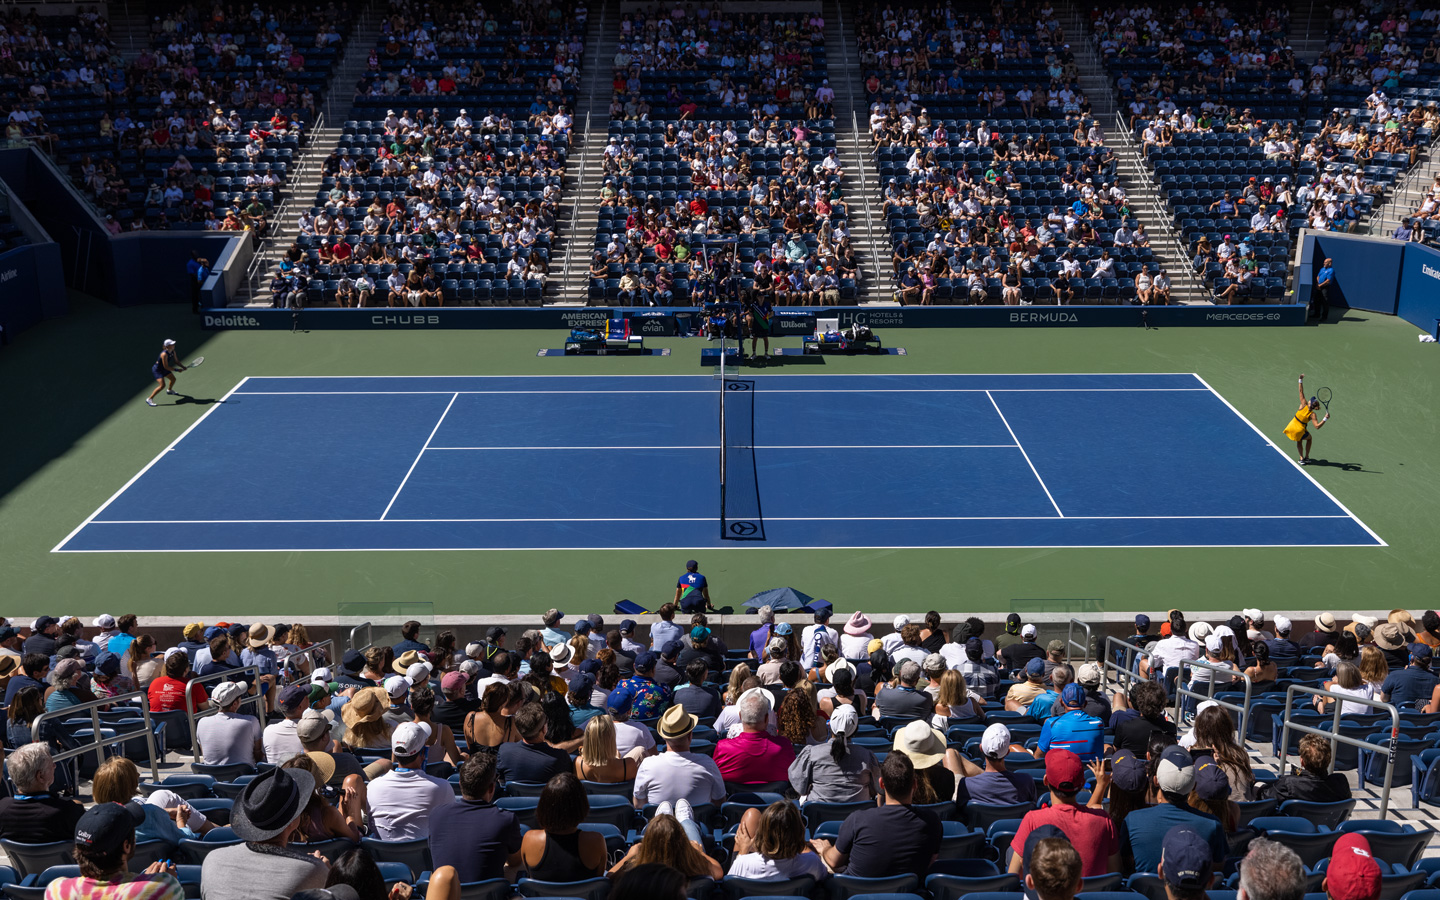 ROLEX AND THE US OPEN: AN ELECTRIC ATMOSPHERE